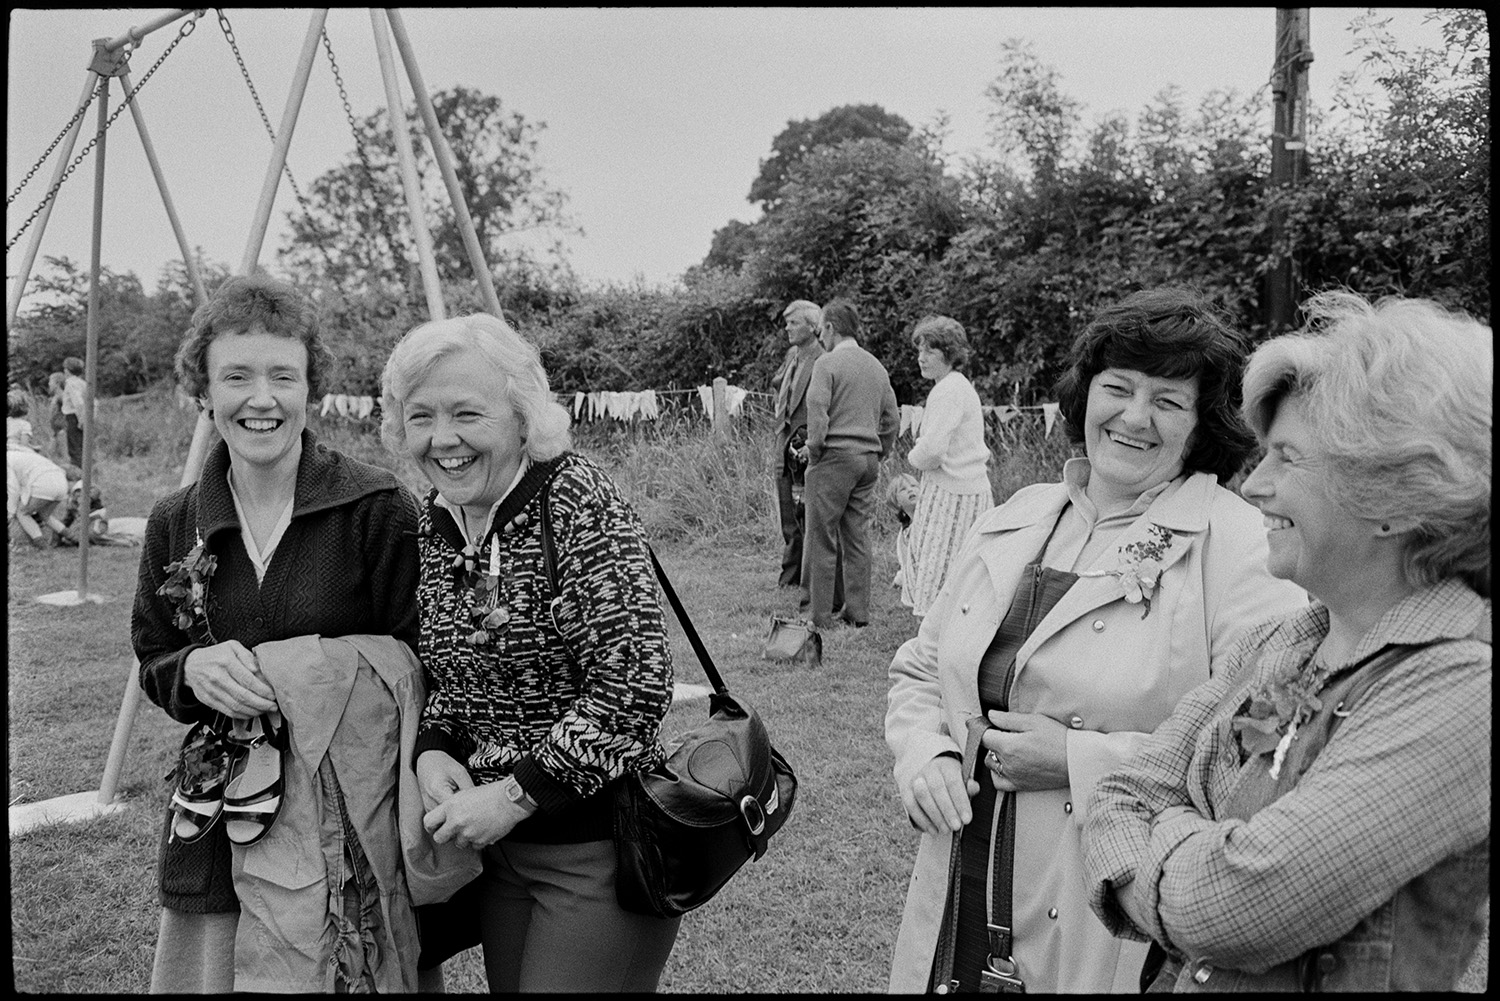 Village sports day, women, chatting, making raffle draw. 
[Four women talking and laughing in a park at Roborough Sports Day. Swings can be seen in the background.]